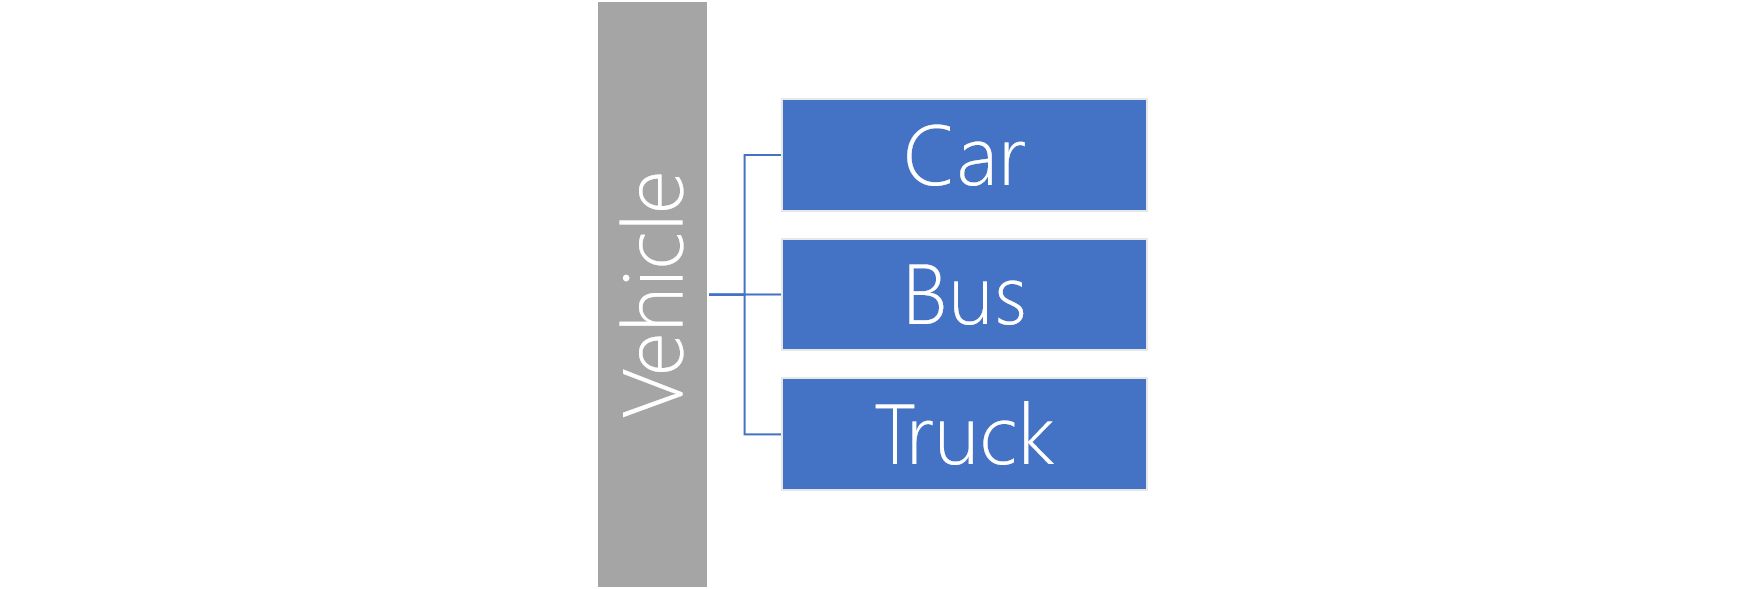 Diagram of the Inheritance from the Vehicle parent class to the car, bus, and truck derived classes.